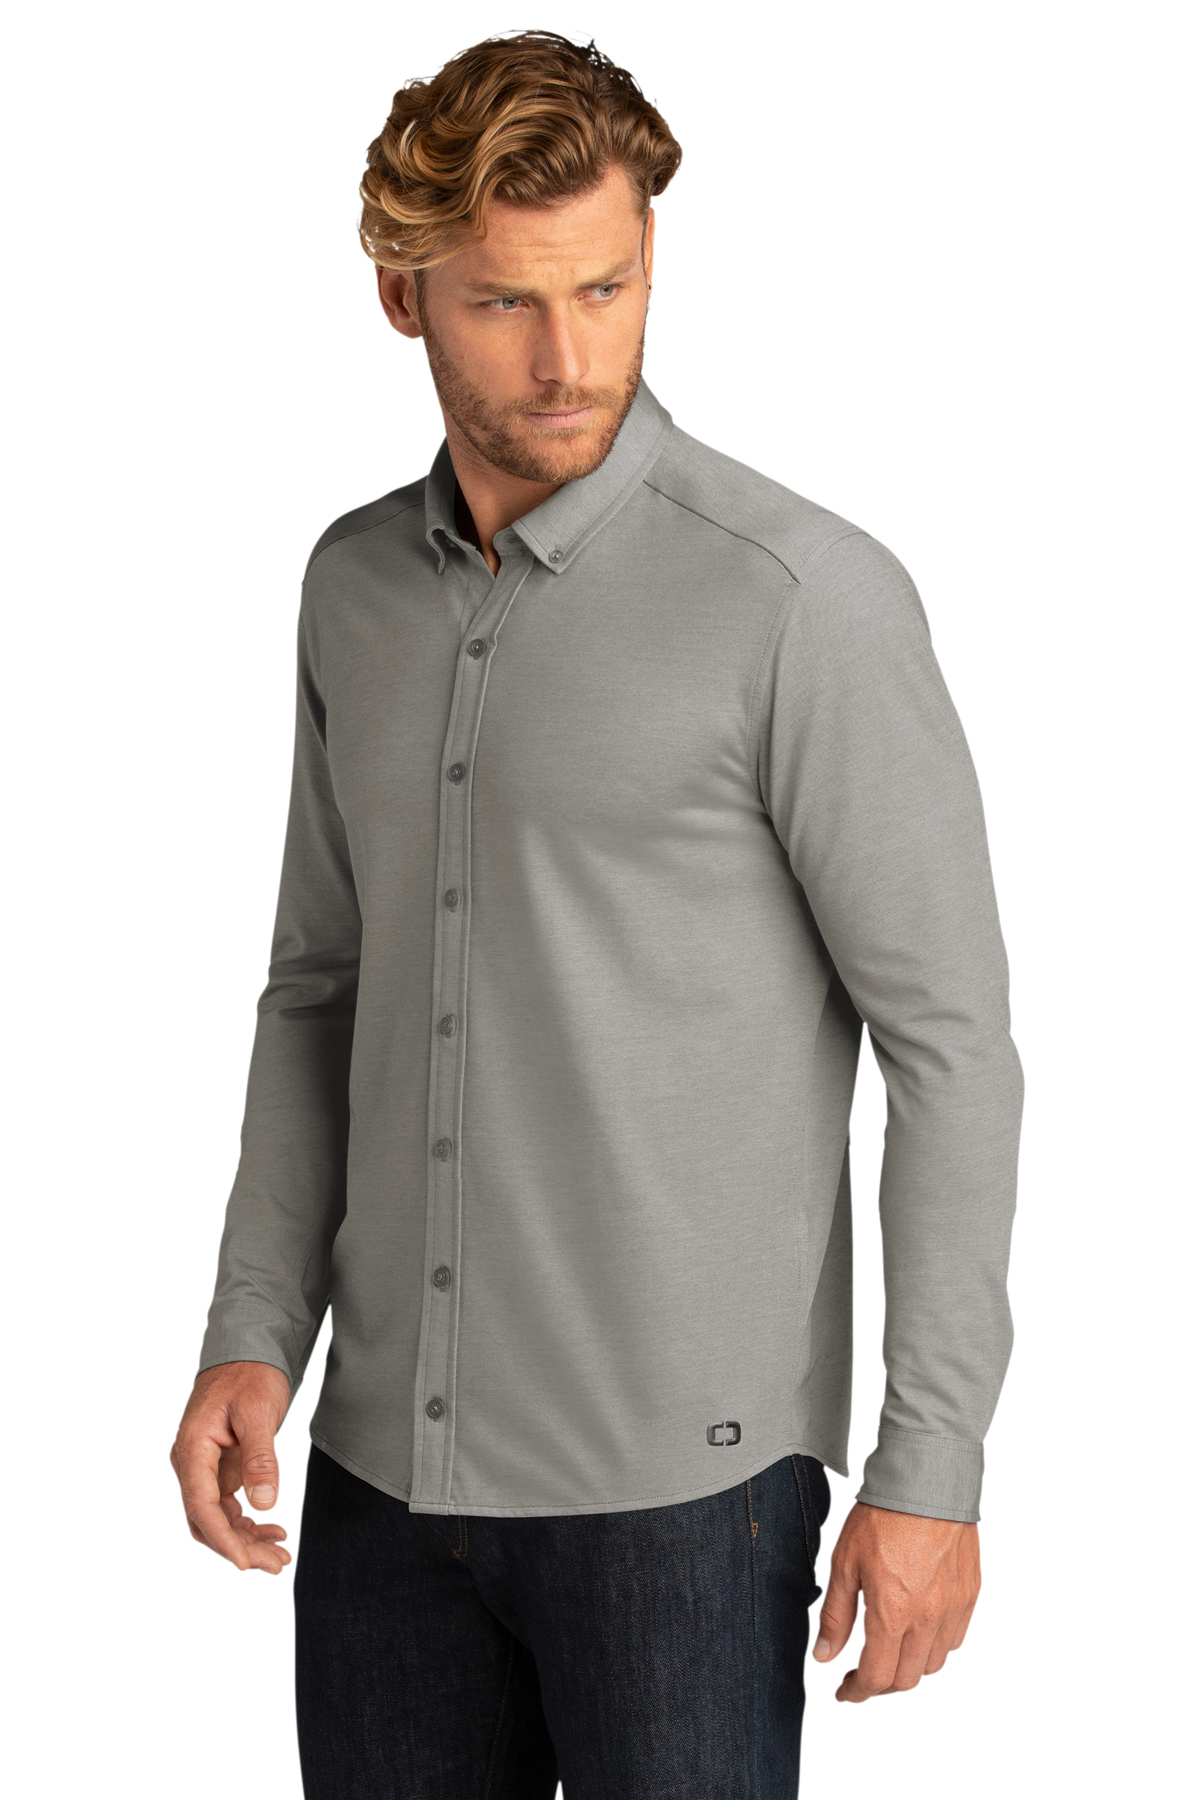 OGIO Code Stretch Long Sleeve Button-Up, Product